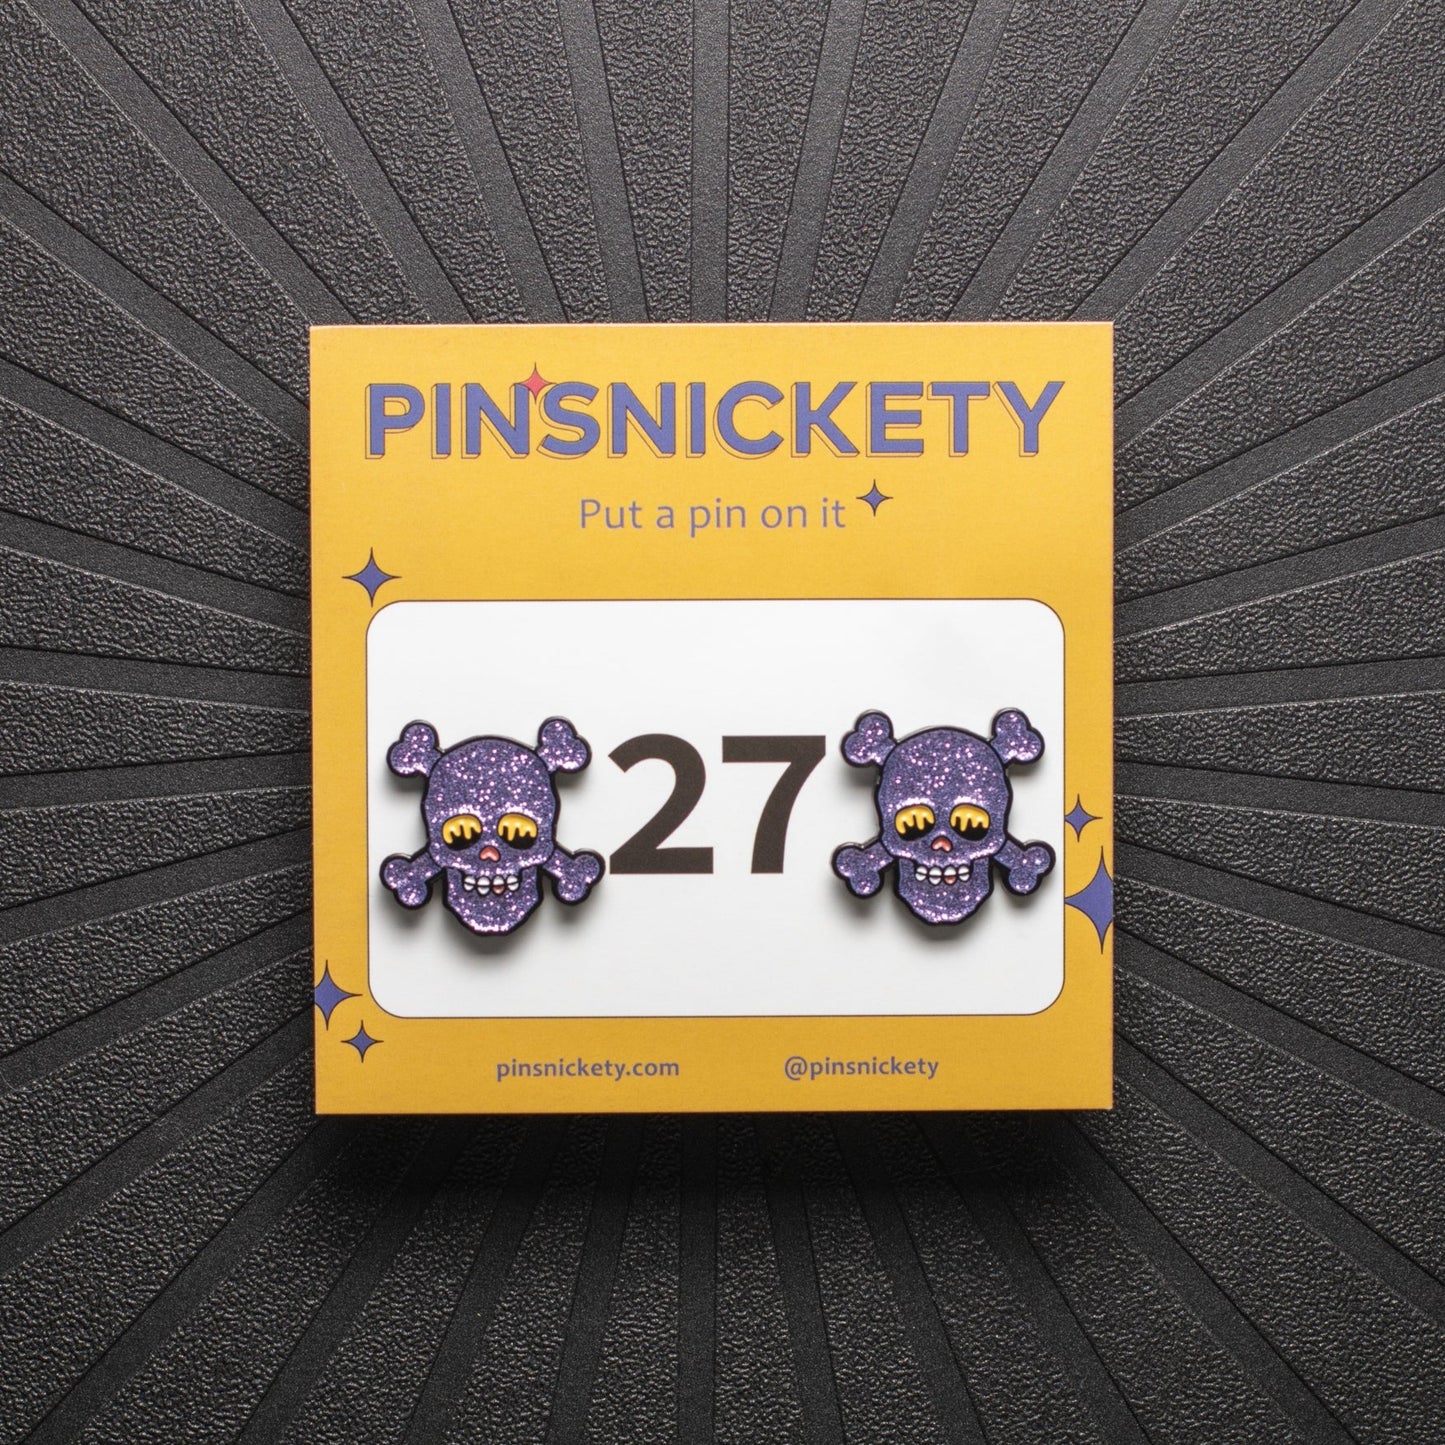 pinsnickety skull horse show number pins on their product packaging card